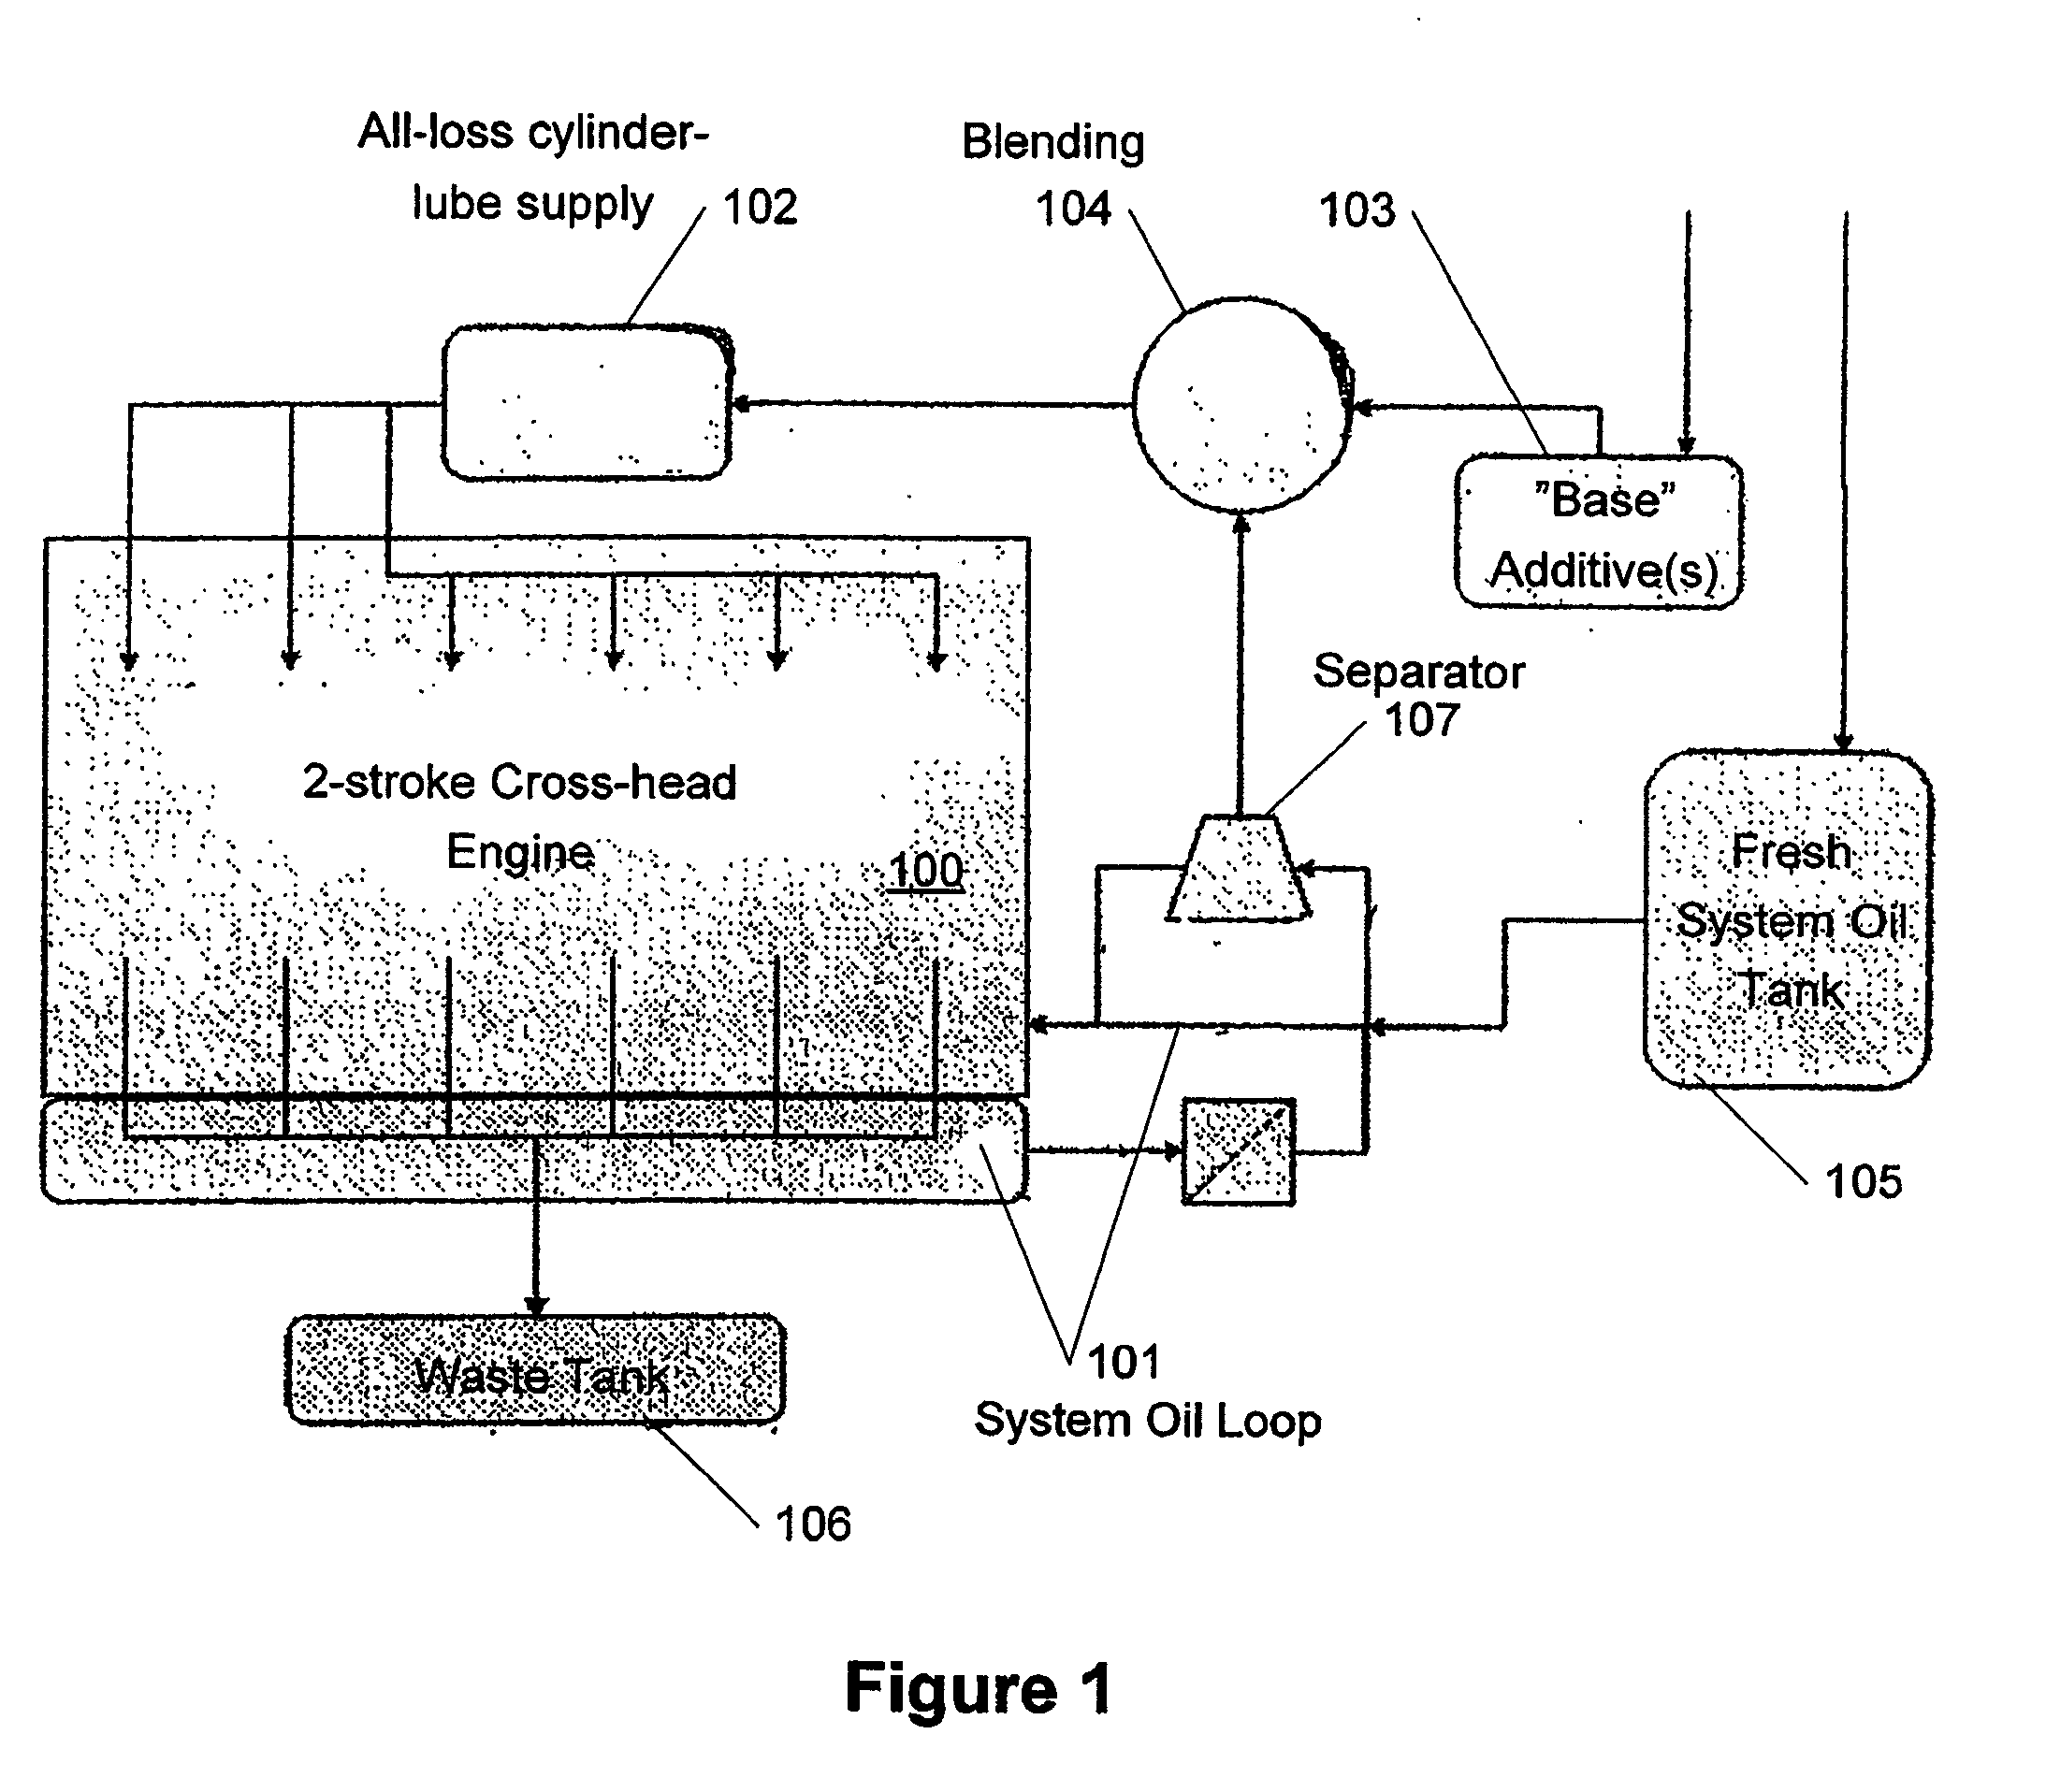 Method and system for modifying a used hydrocarbon fluid to create a cylinder oil